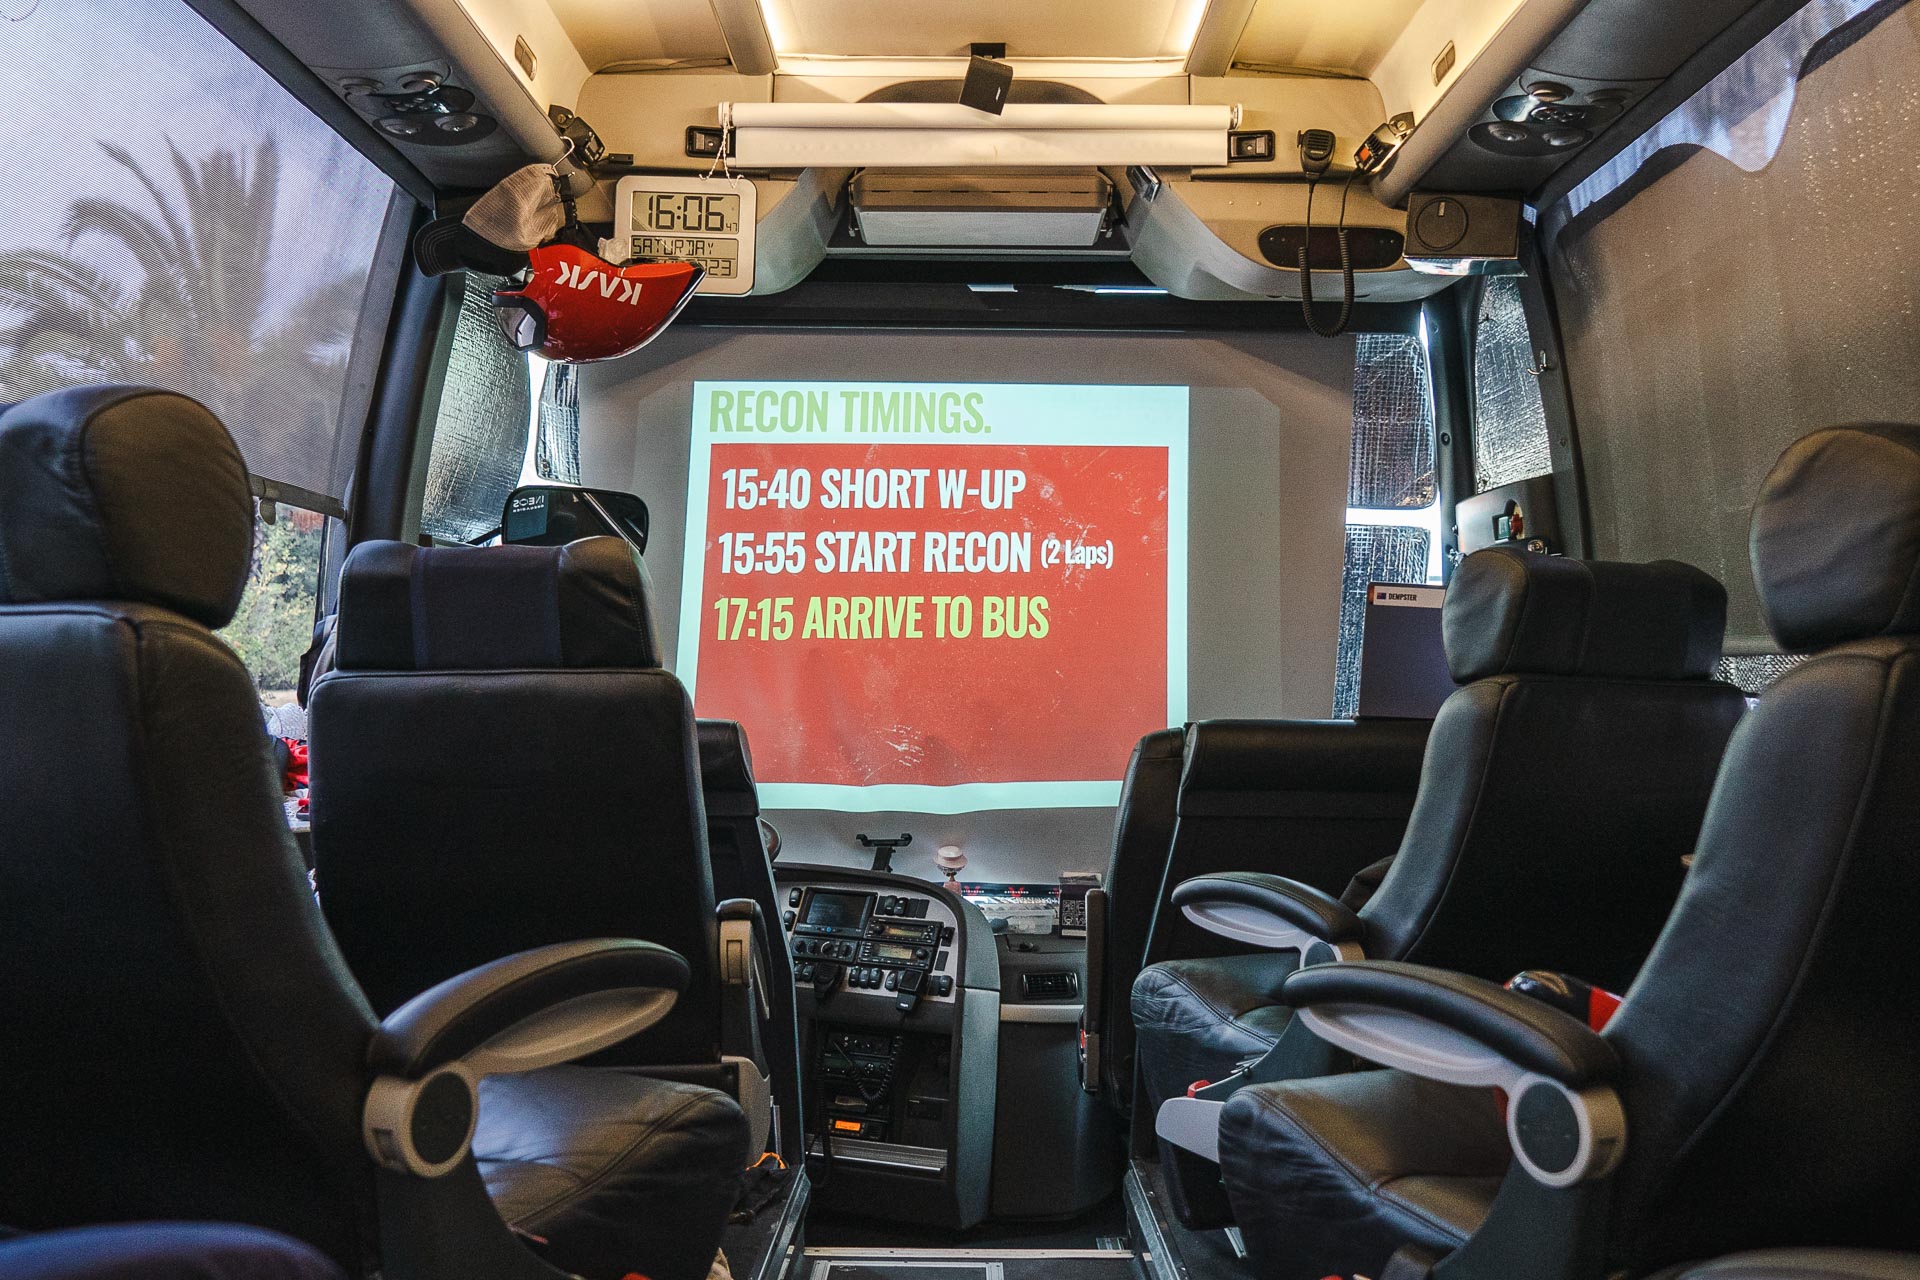 The image shows a photo from inside the Ineos Grenadiers team bus with a projector displaying the timetable for the day on a pull-down screen. The time table reads: Recon times. 15:40 Short warm-up. 15:55 Start Recon (2 laps). 17:15 Arrive to bus. A clock on the bus shows it is currently 16:40